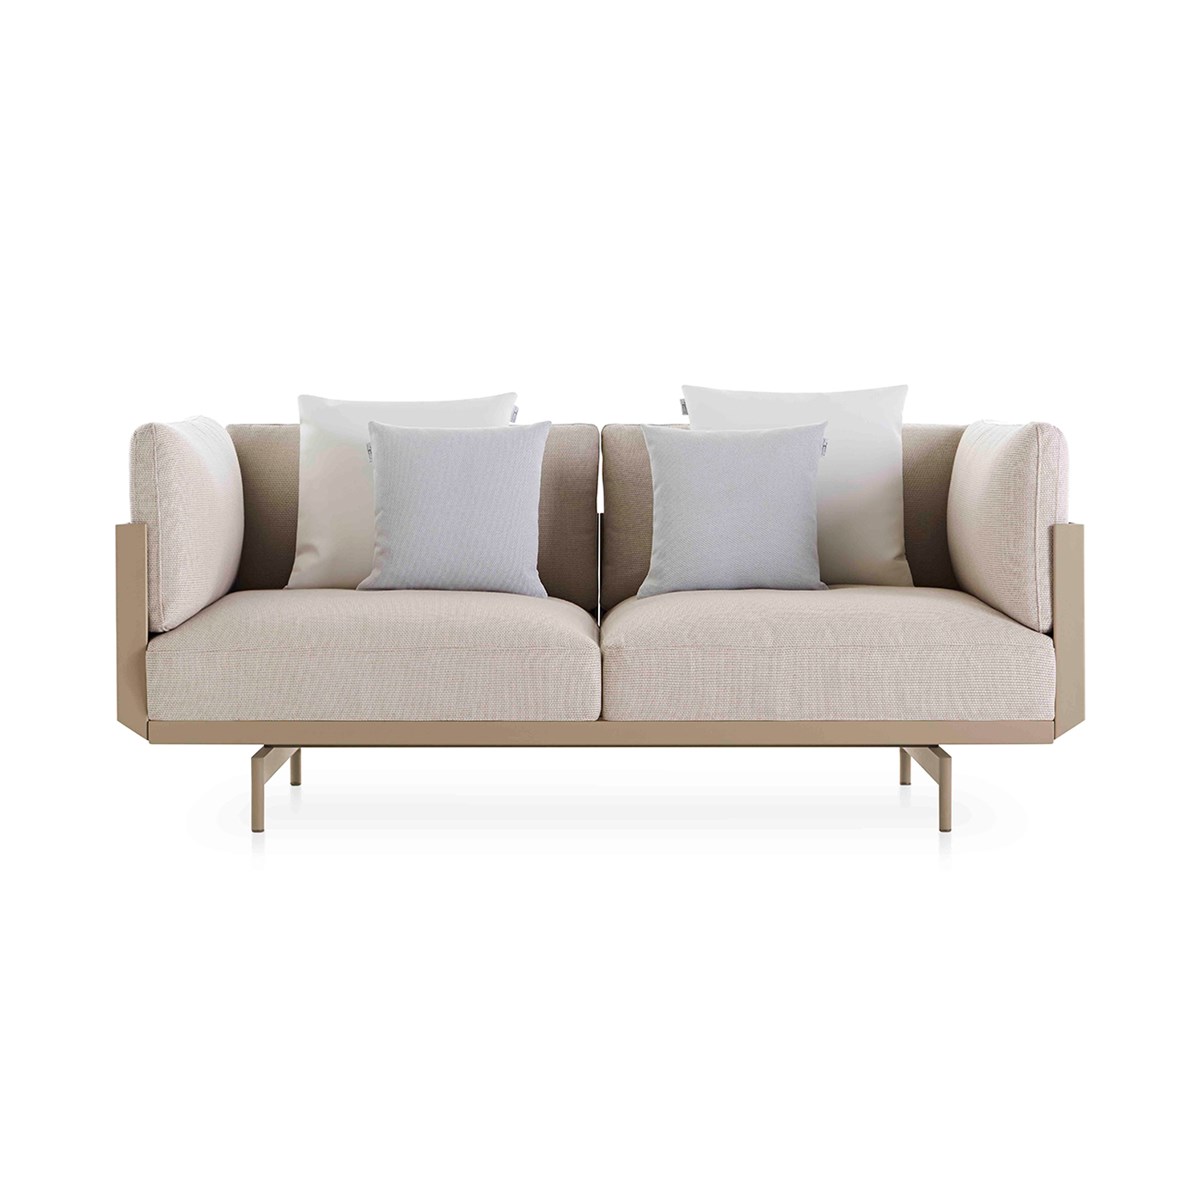 Onde 2 Seat Sofa Sand Majestic River Front (1)